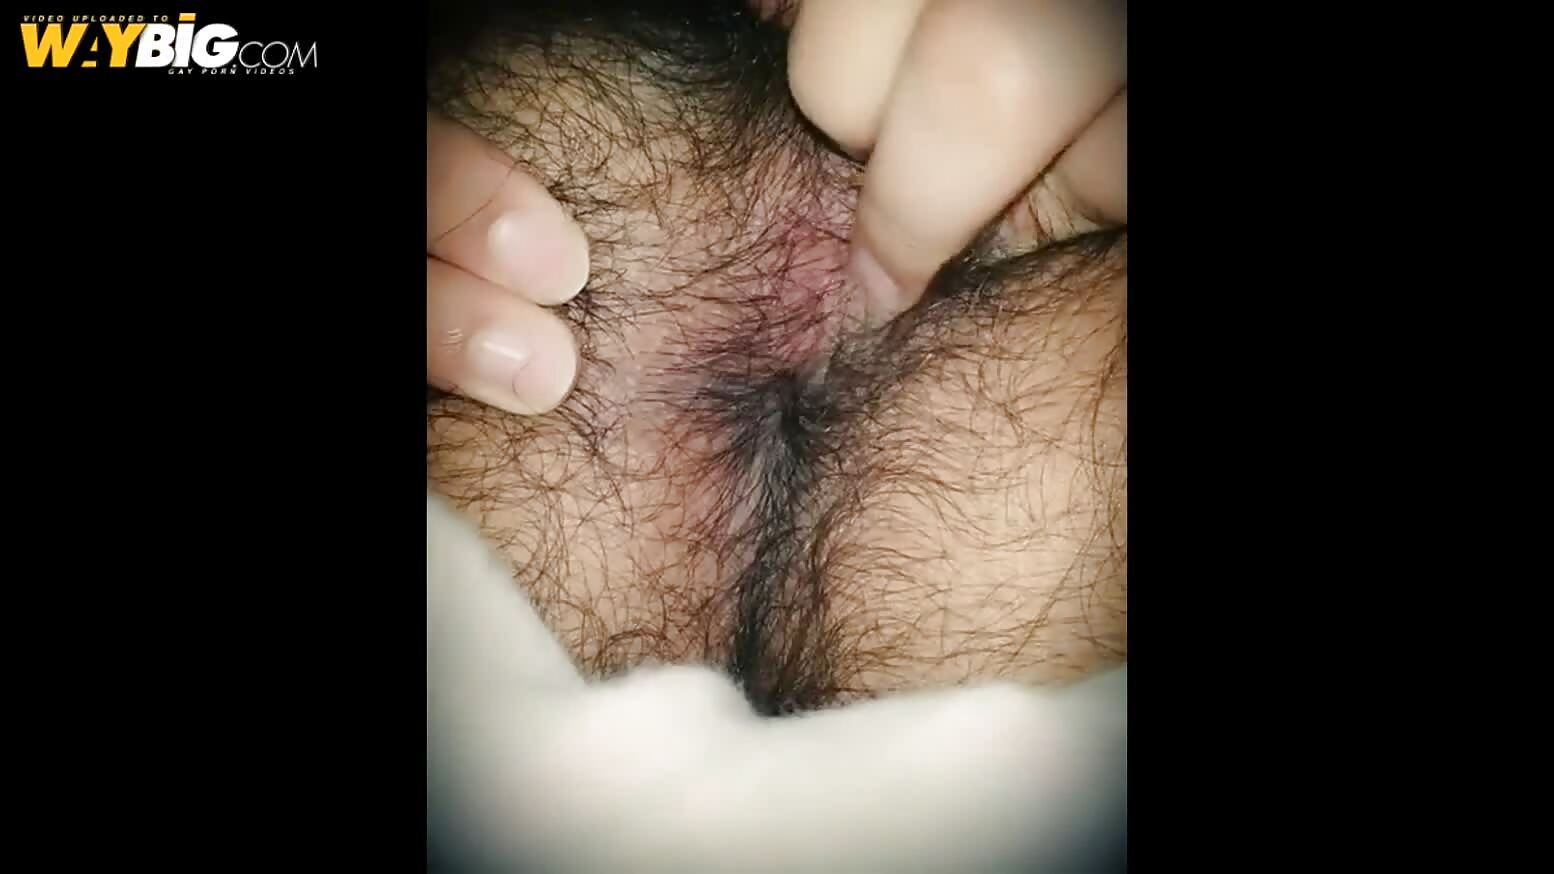 Playing with my hairy ass